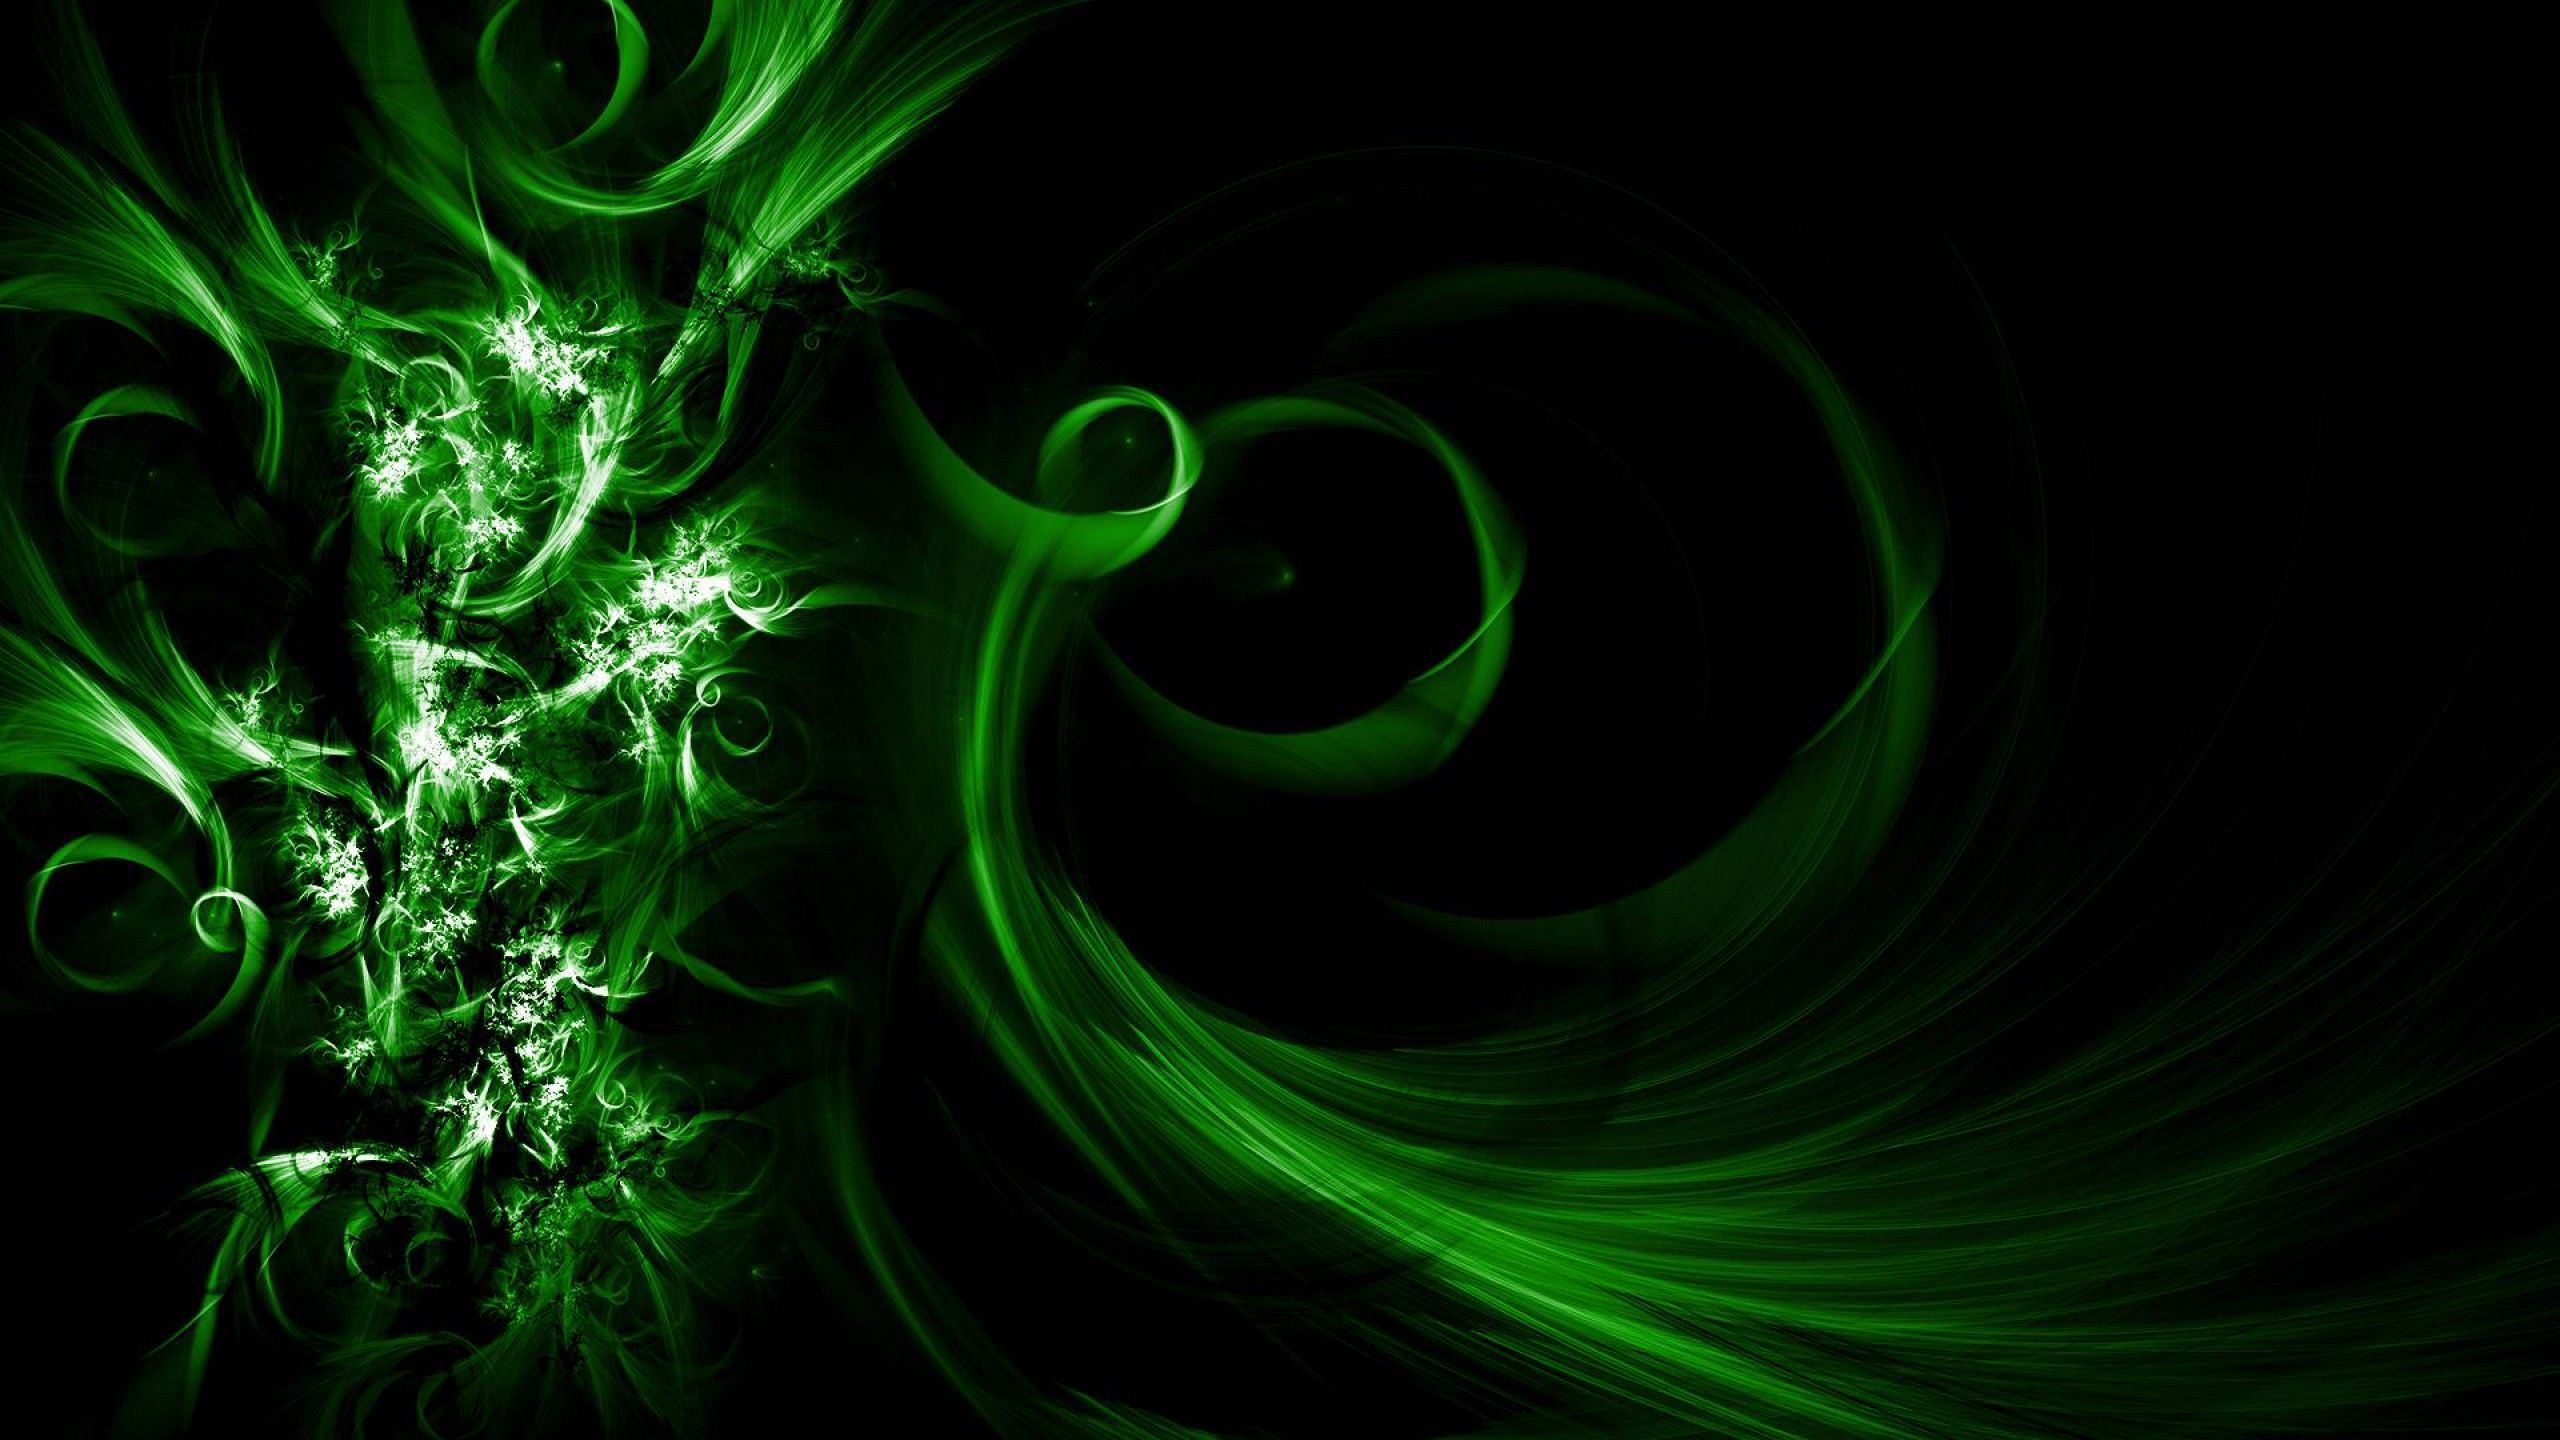 Cool Abstract Wallpaper with an Image of Dark Green Waves | HD ...